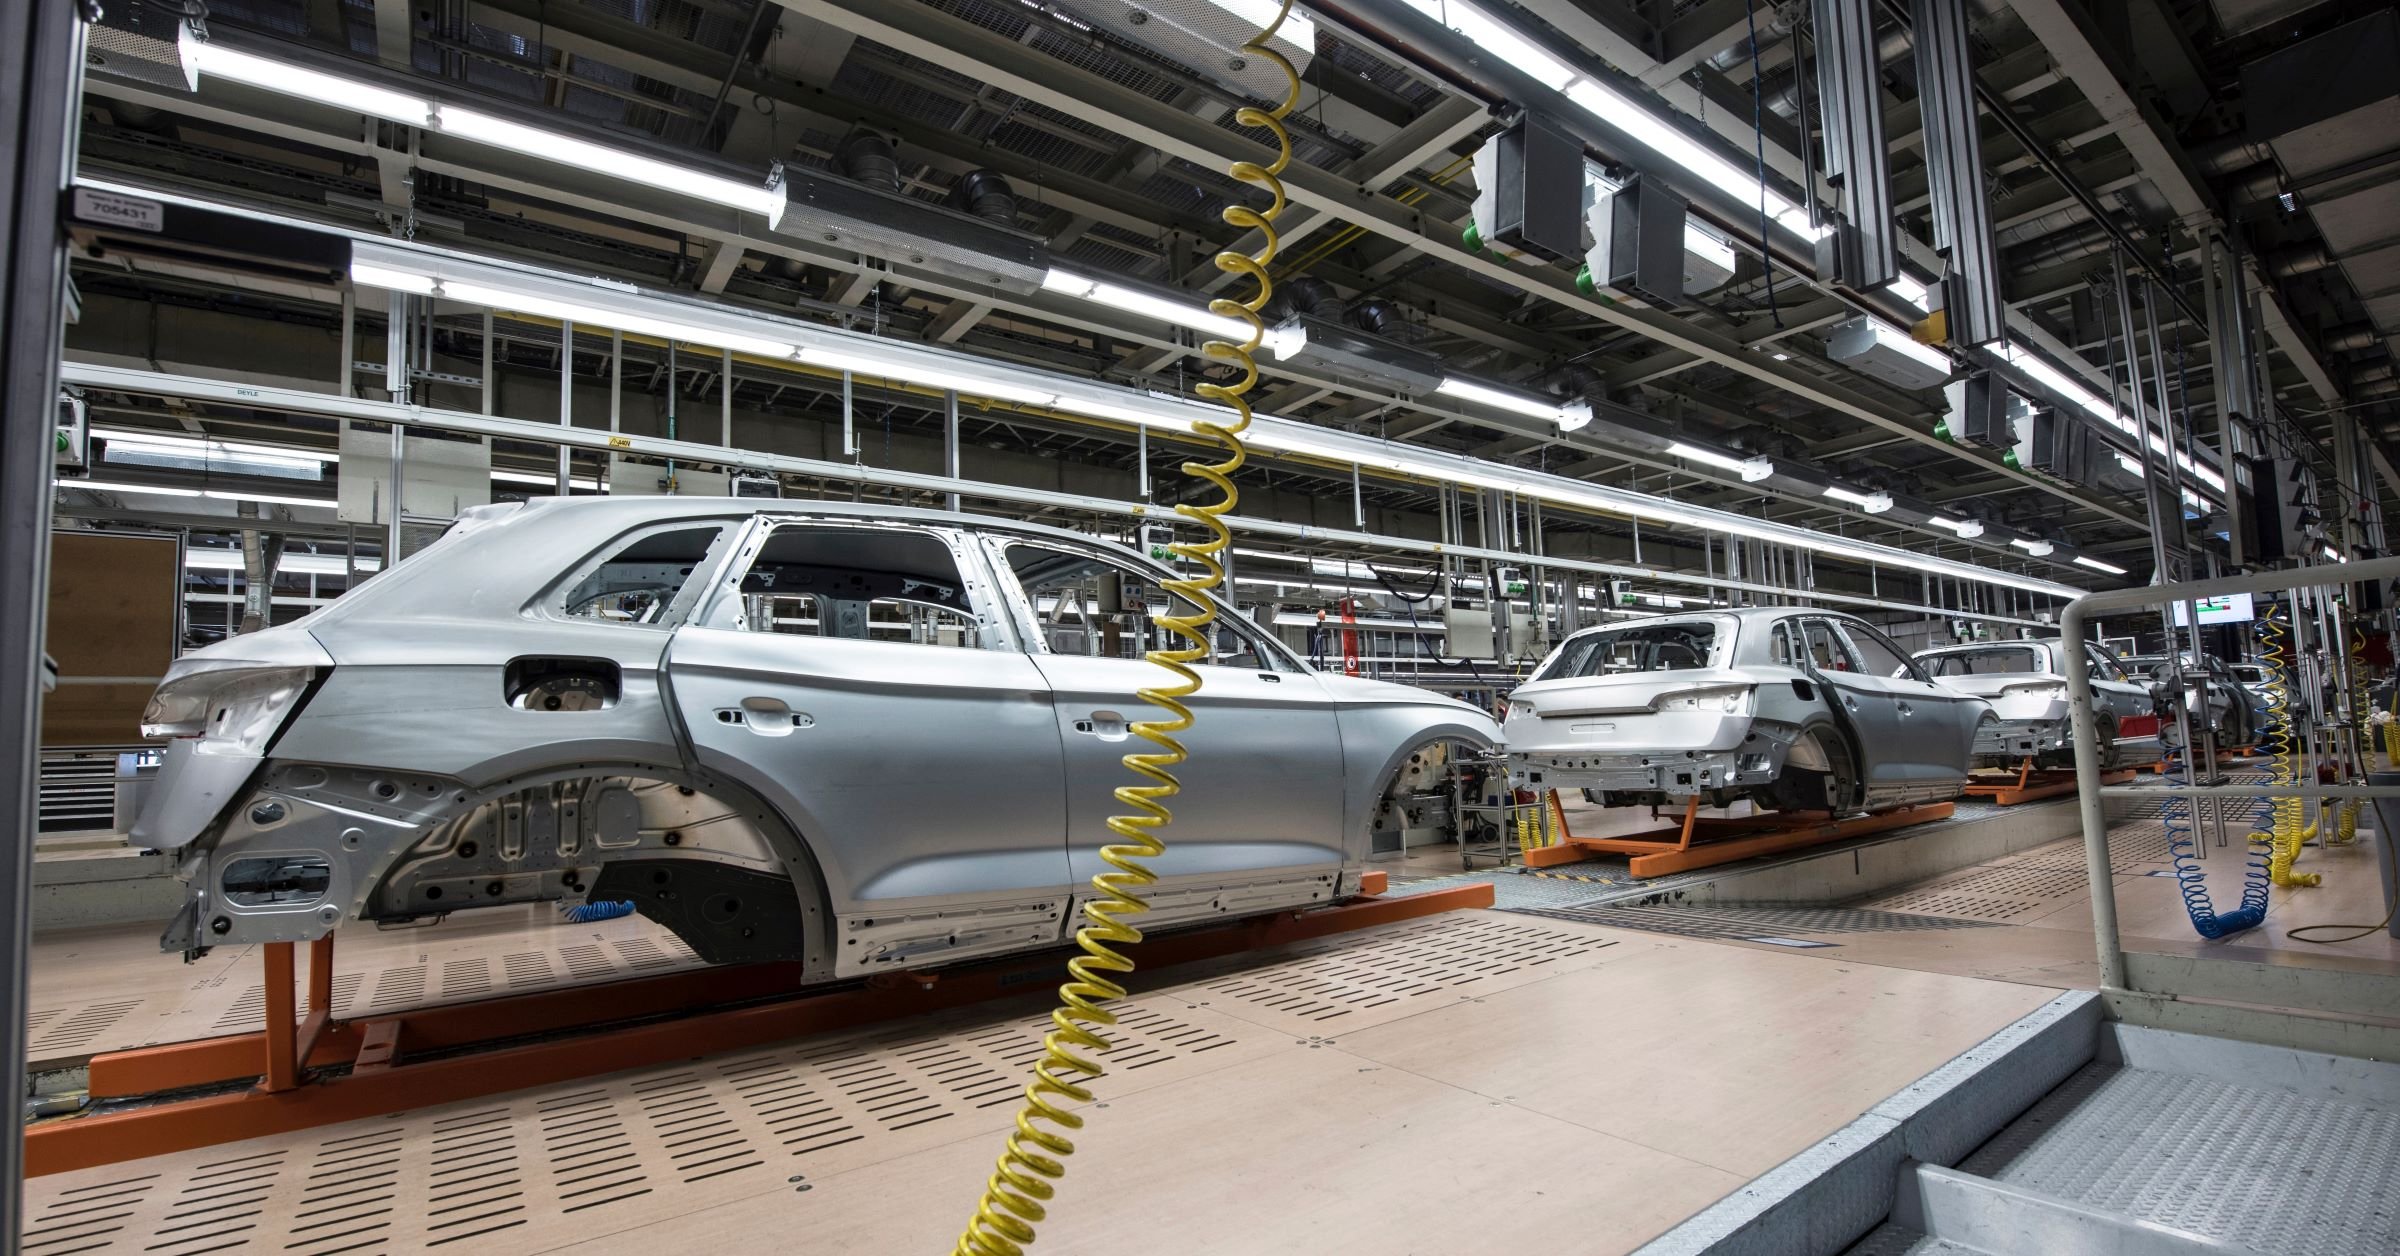 Silver cars being produced in an assembly line in a manufacturing facility.